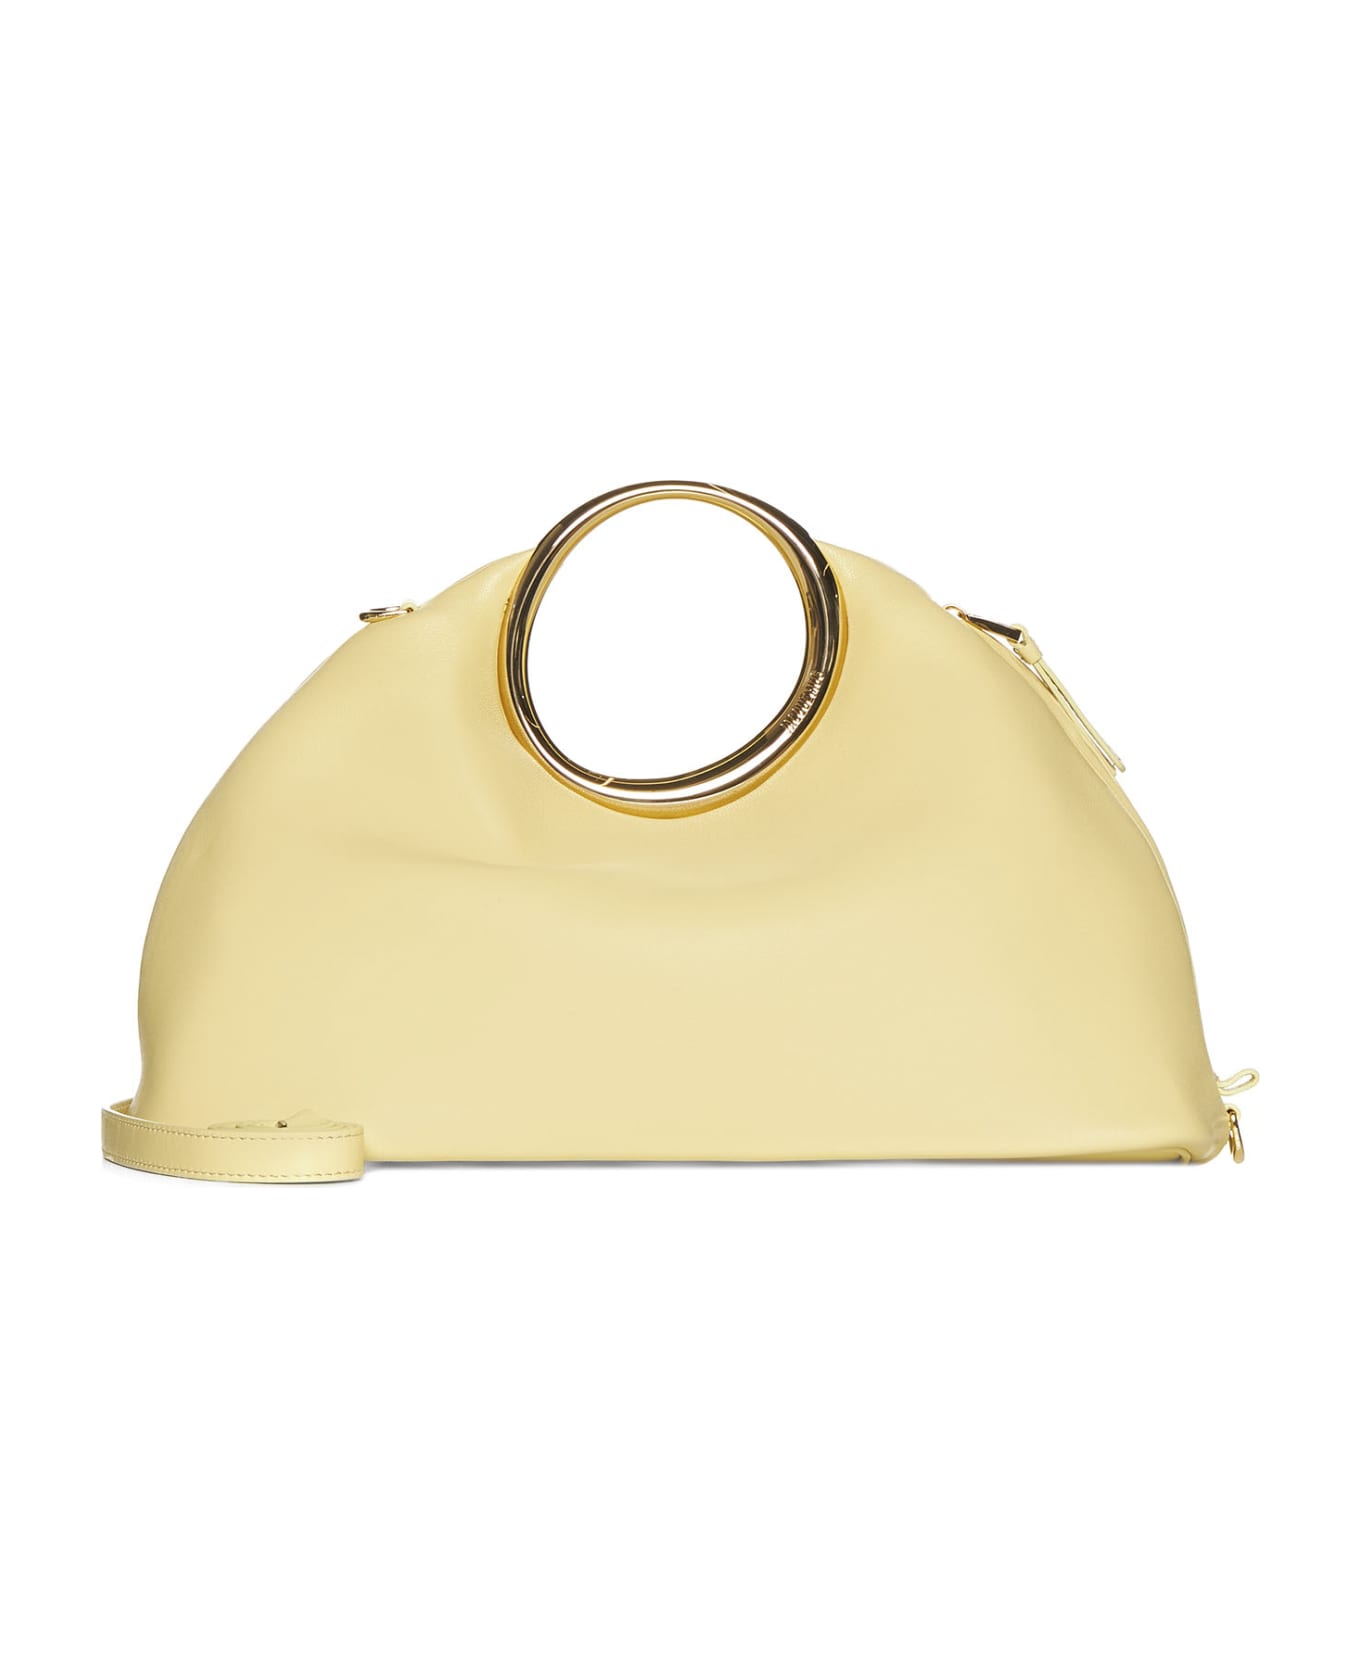 Jacquemus Tote - Pale yellow